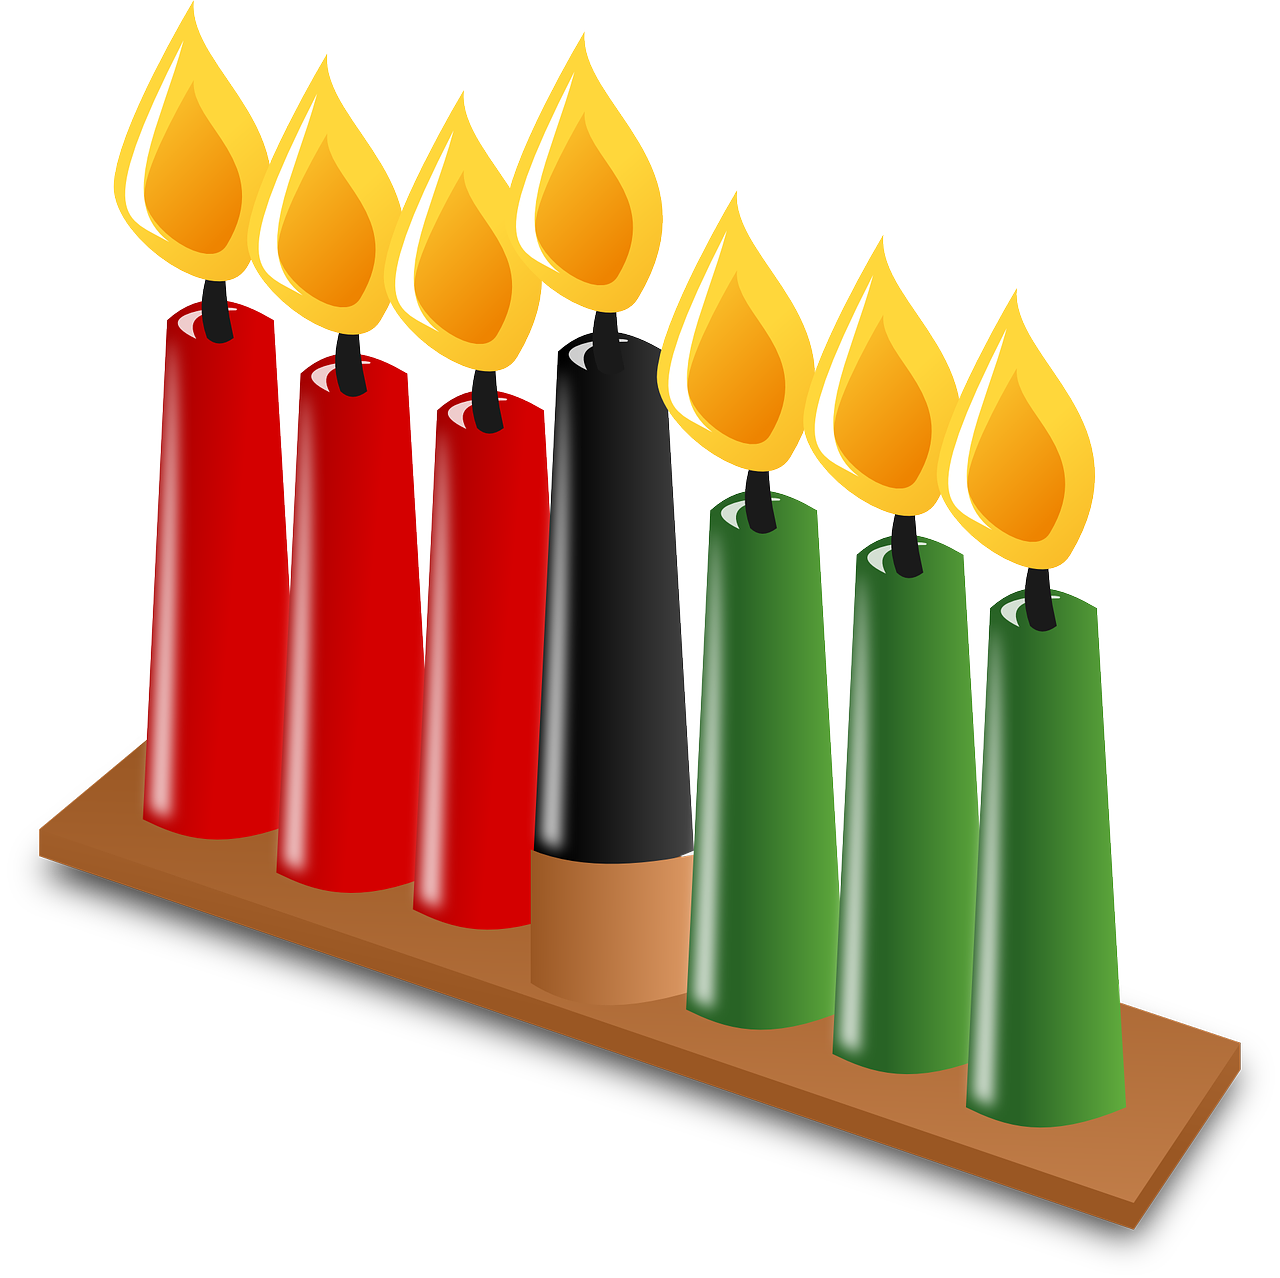 Kwanzaa clipart black and white. Happy december january yonkers